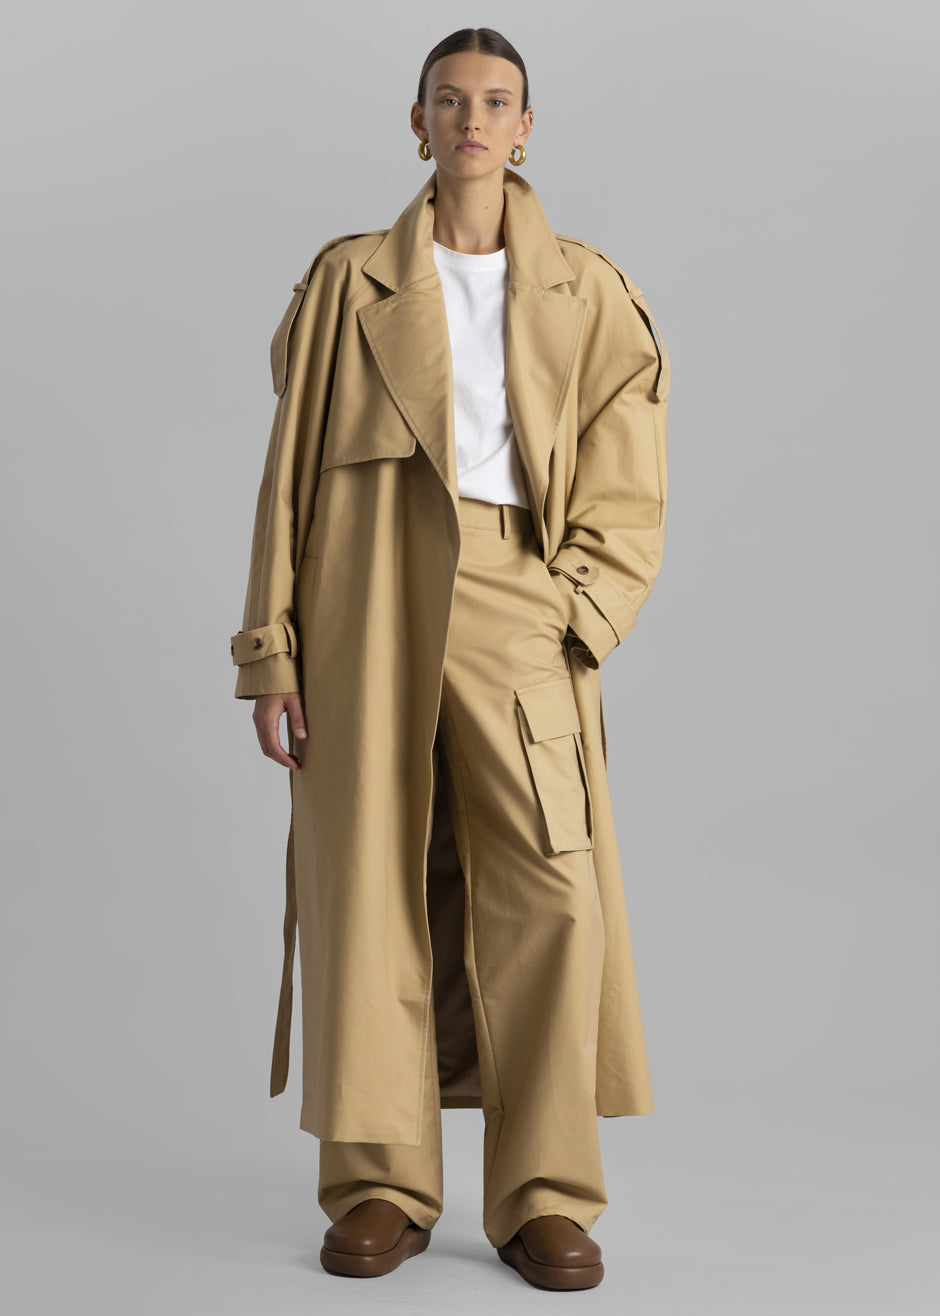 Suzanne Trench Coat - Beige - 4